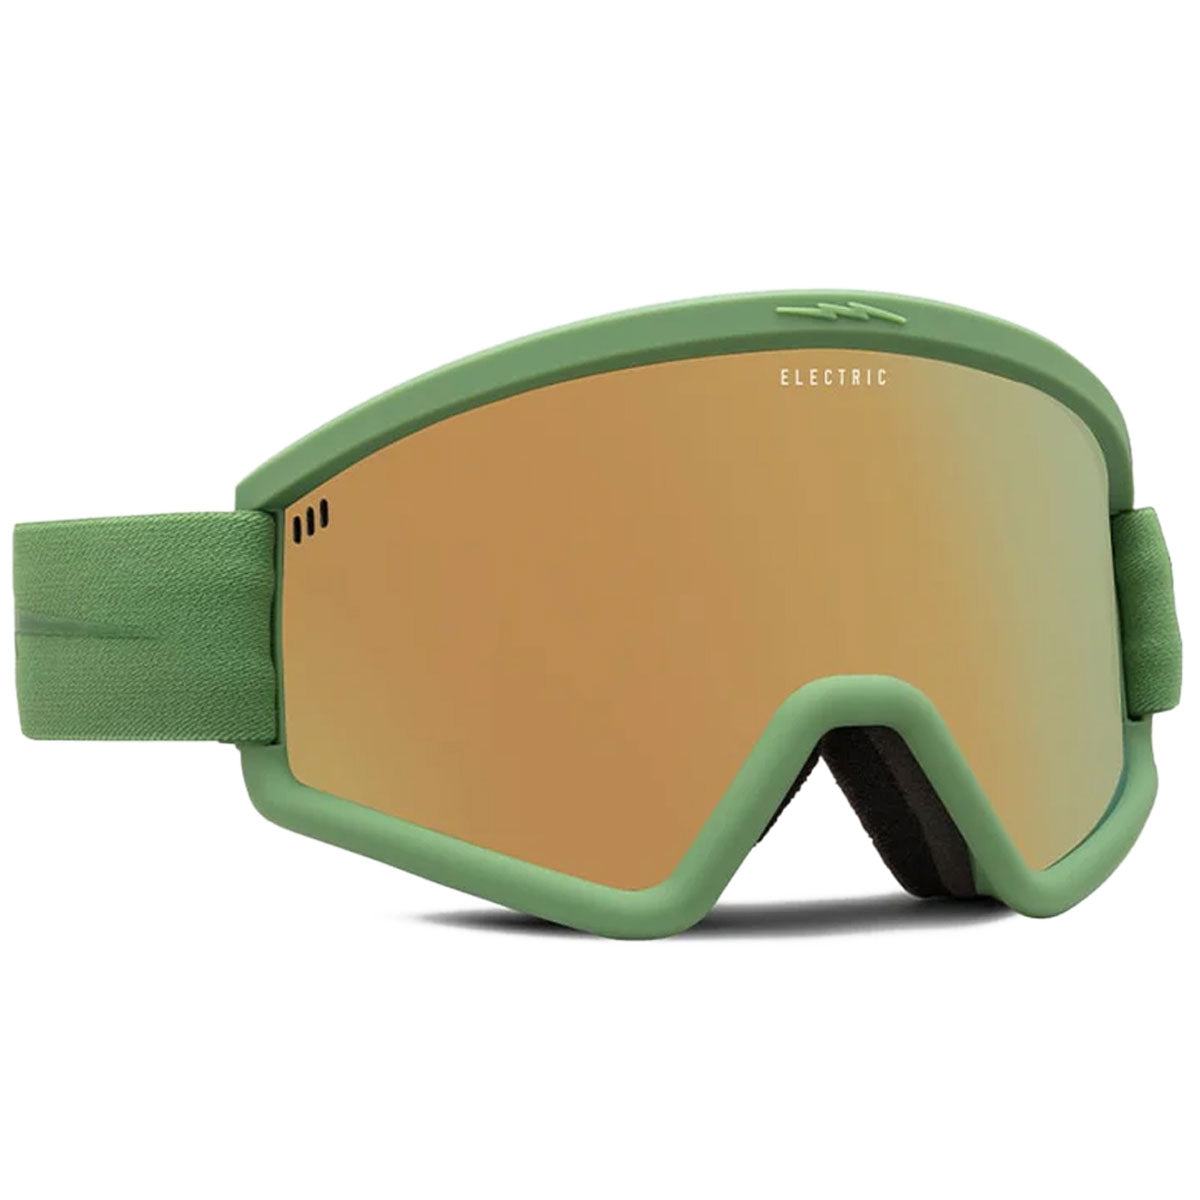 Electric Hex Snowboard Goggles - Matte Moss/Gold Chrome image 1